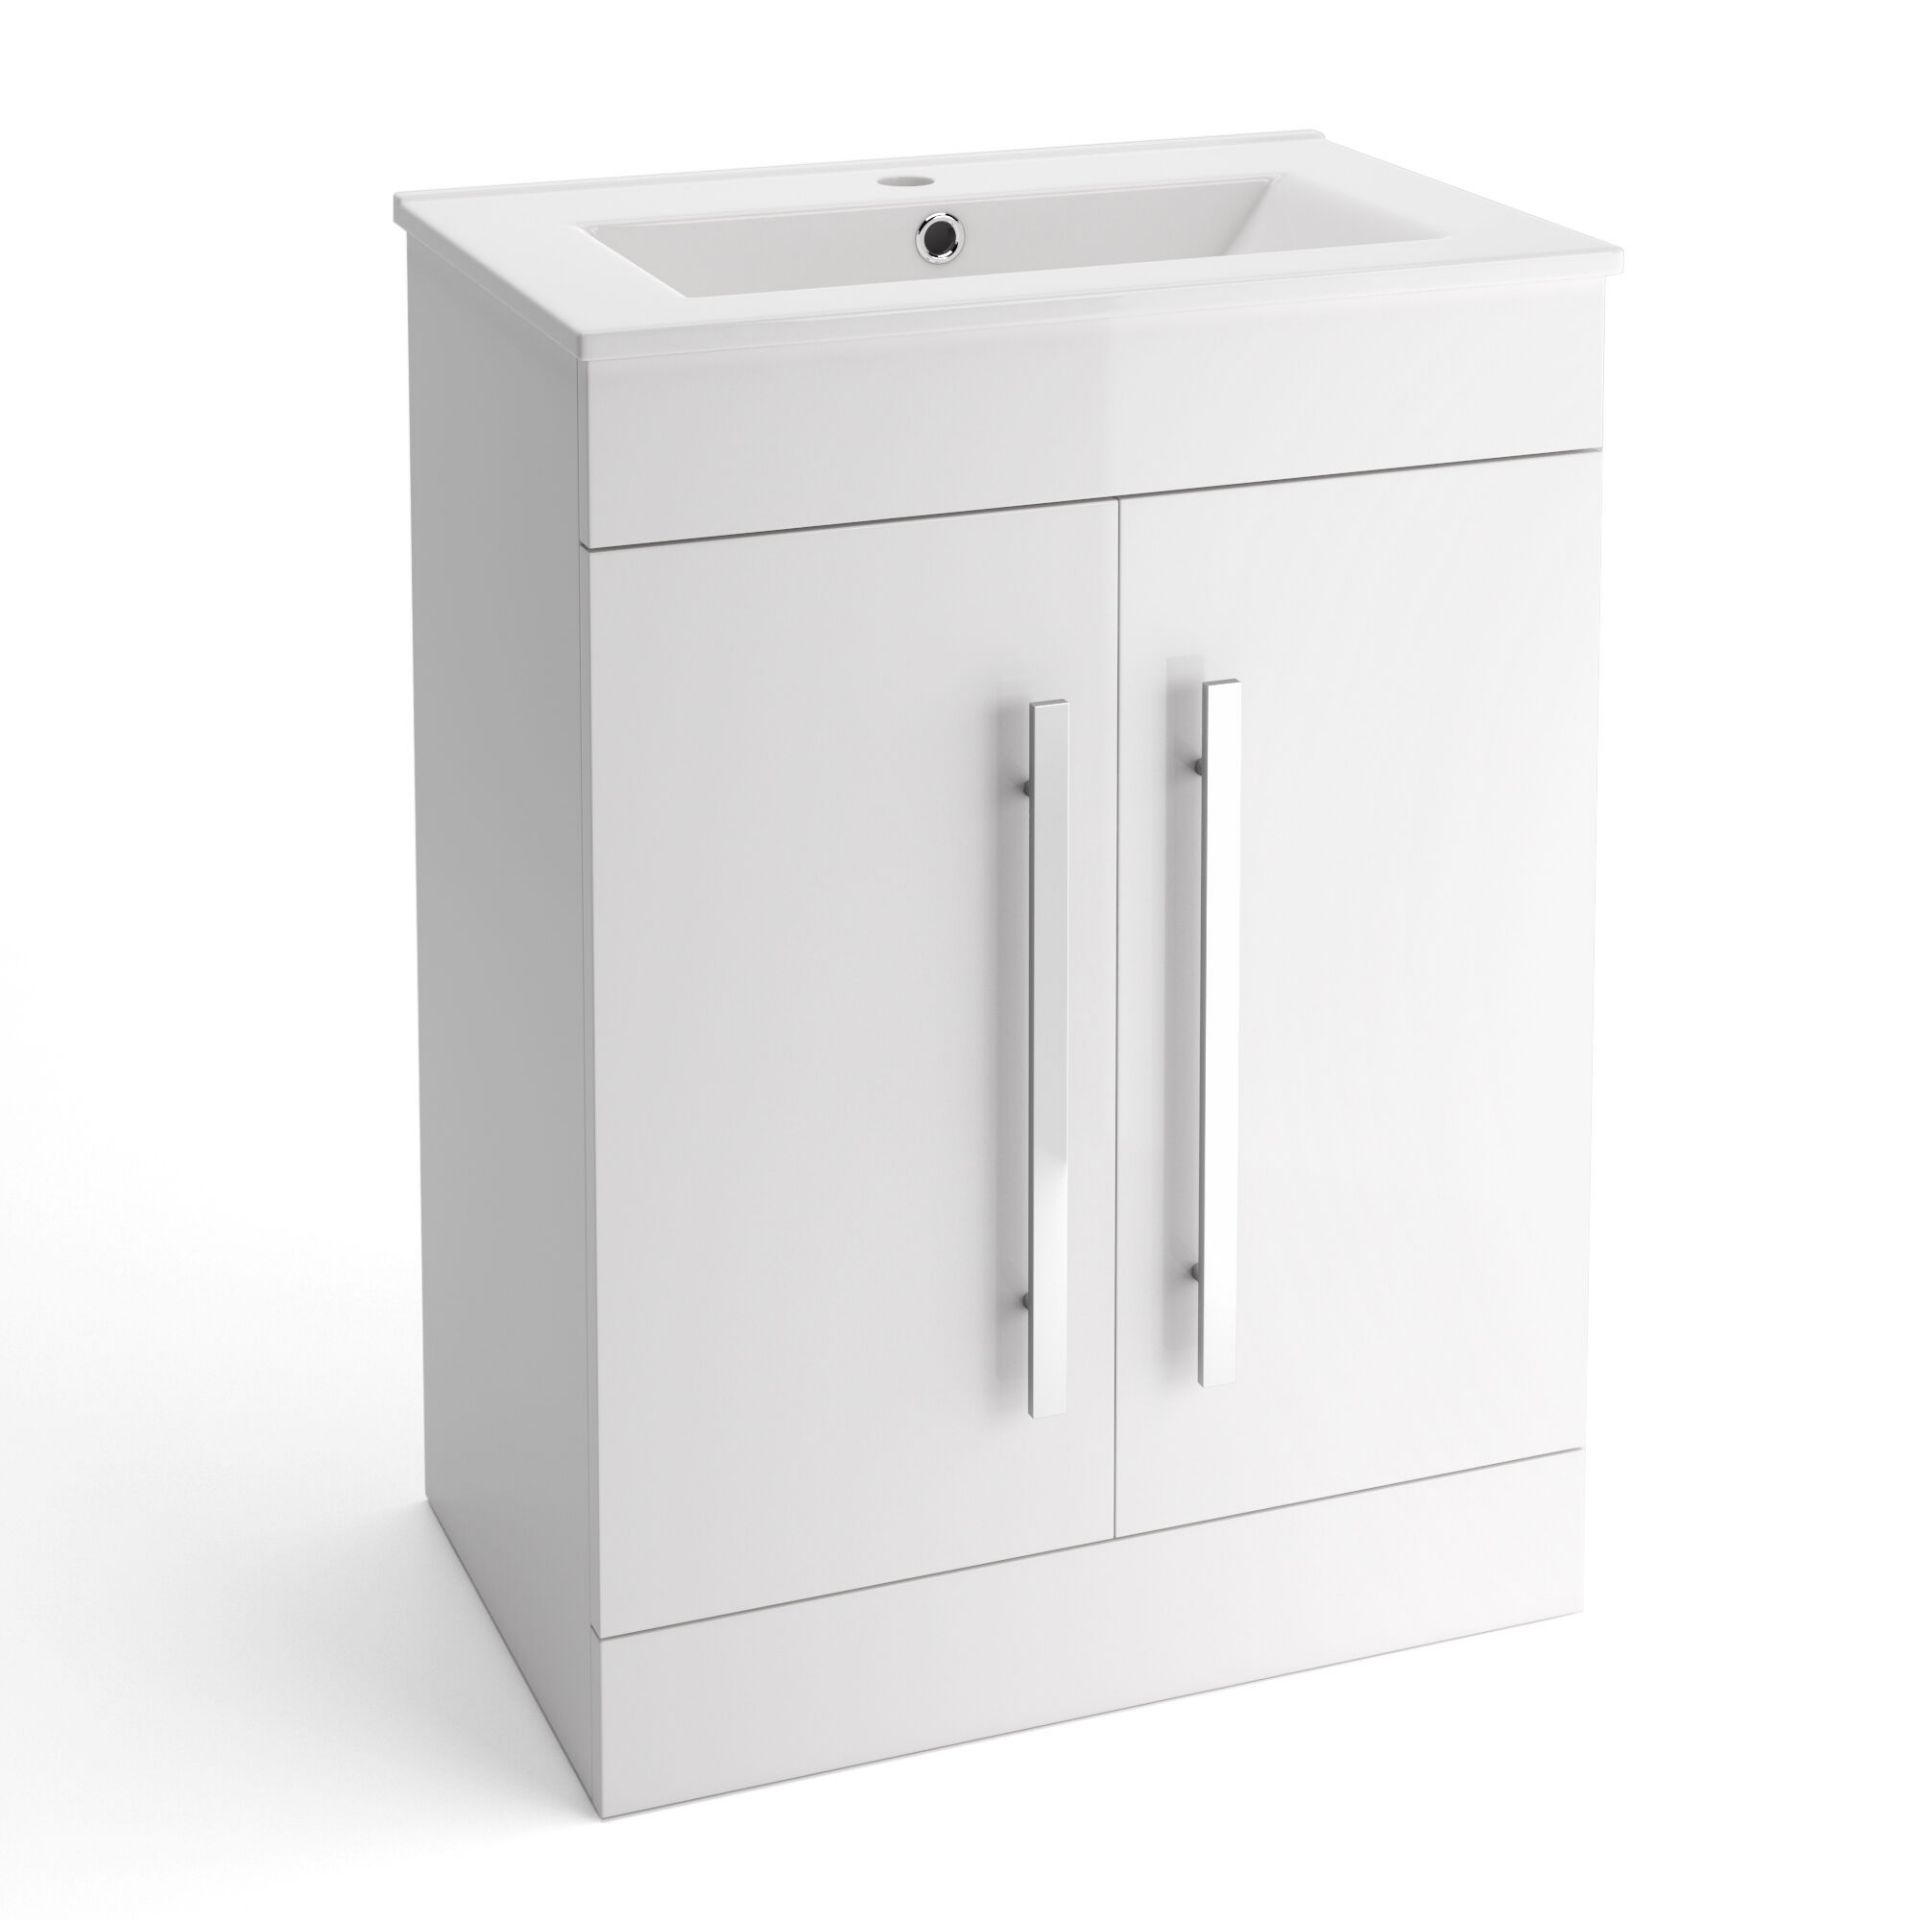 (PT17) 600mm Avon High Gloss White Basin Cabinet - Floor Standing. RRP £499.99. Comes complete - Image 4 of 5